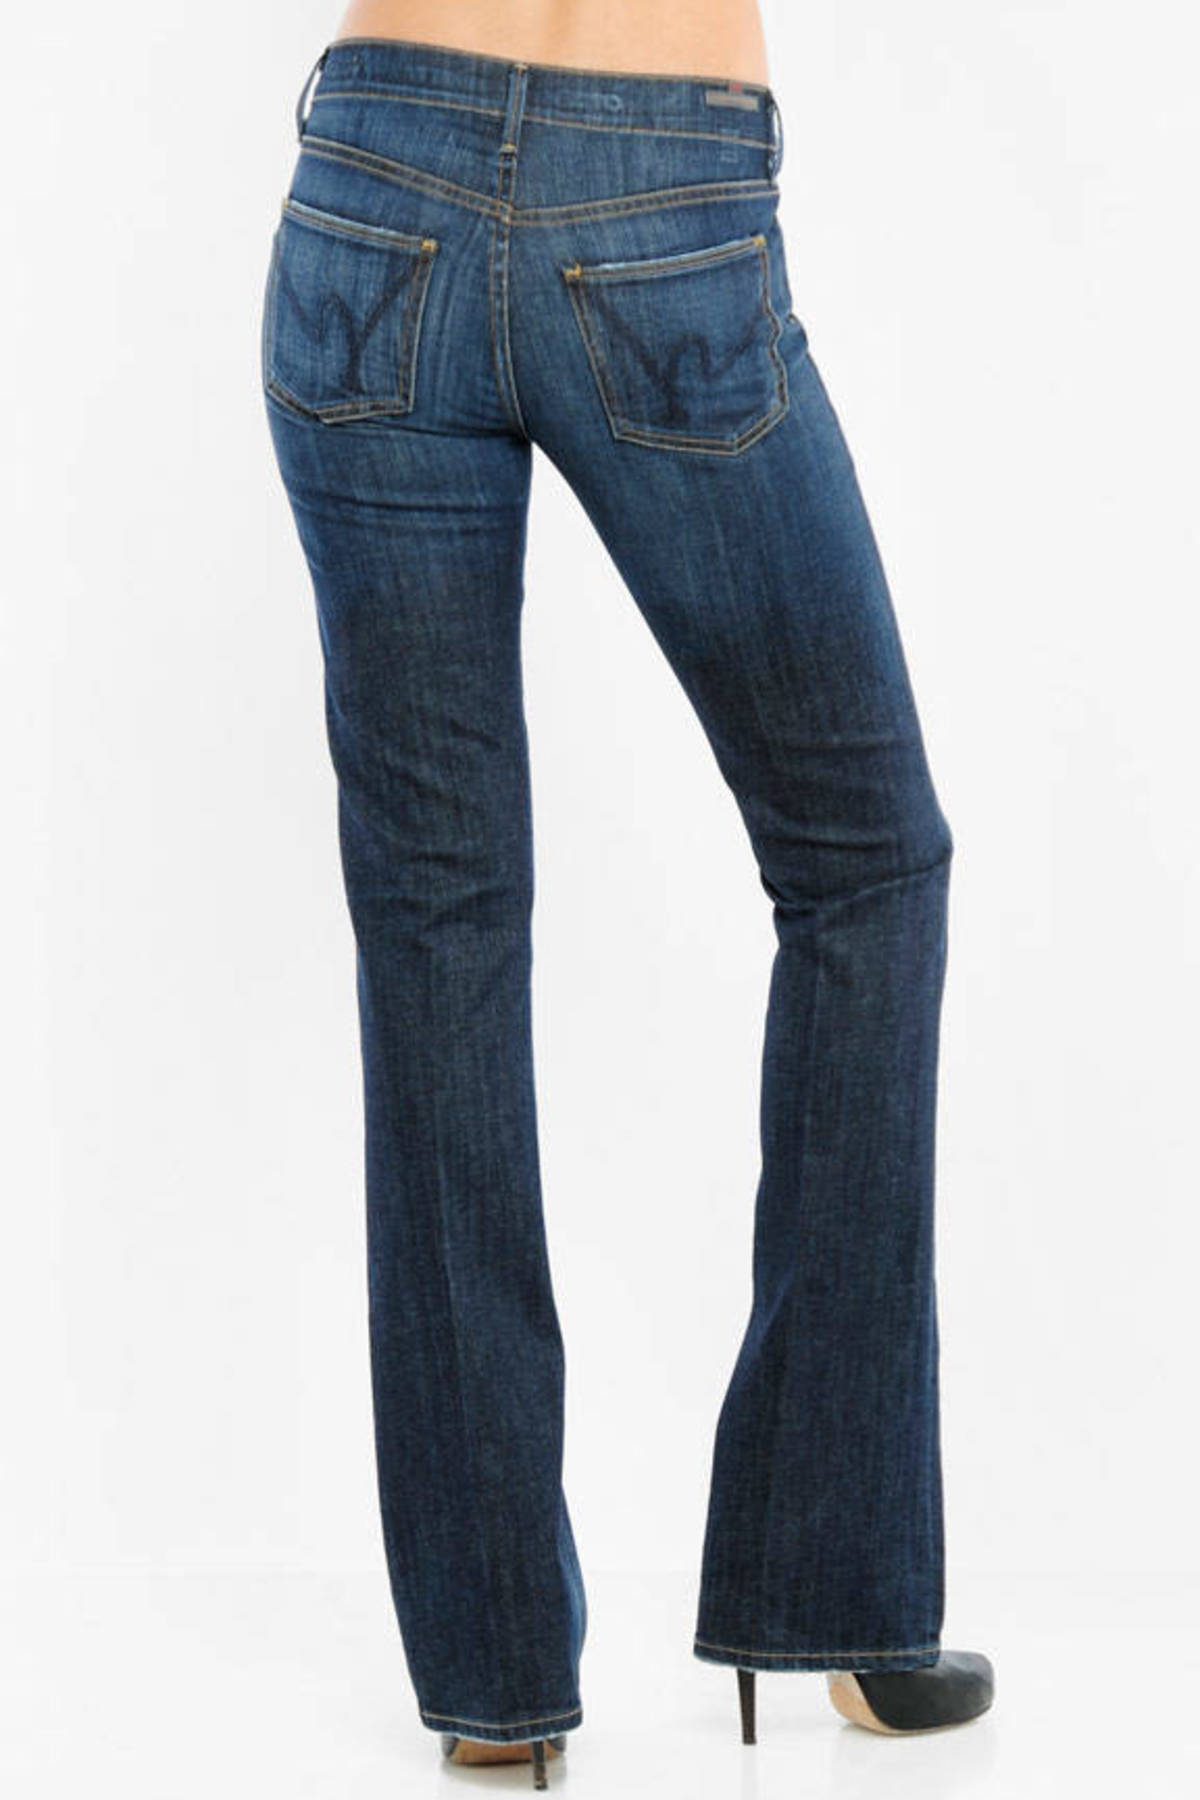 Amber Mid Rise Bootleg Jeans in Pacific - NZ$ 129 | Tobi NZ